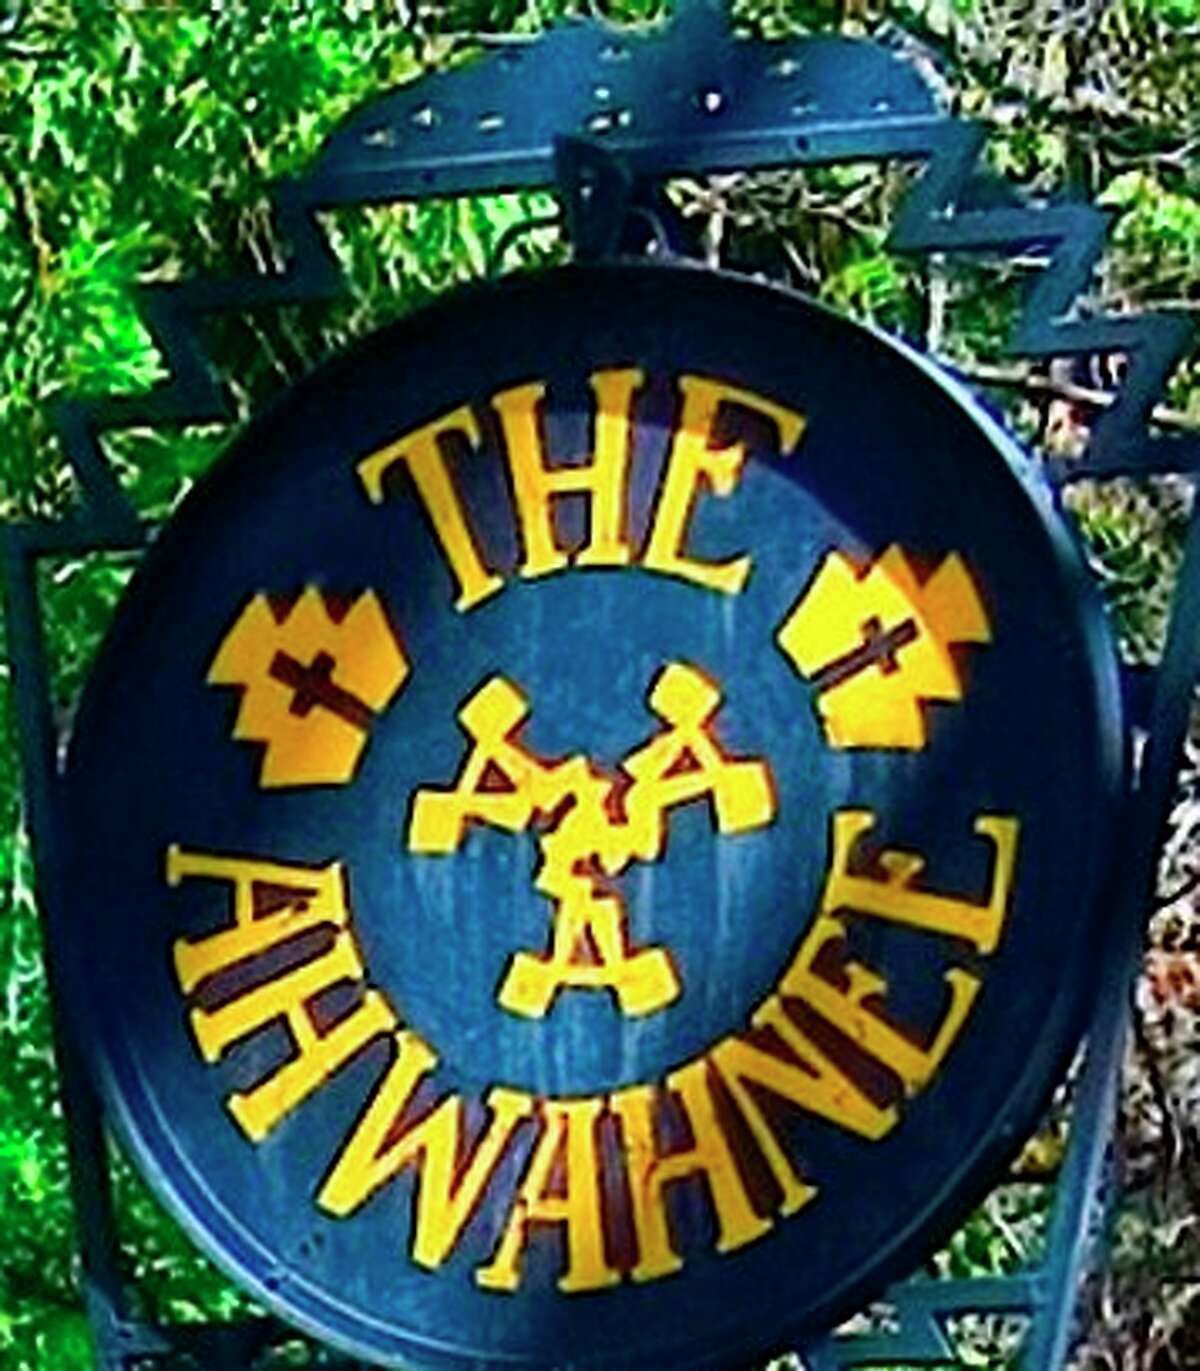 The Ahwahnee Hotel sign was stolen before the hotel change names March 1.